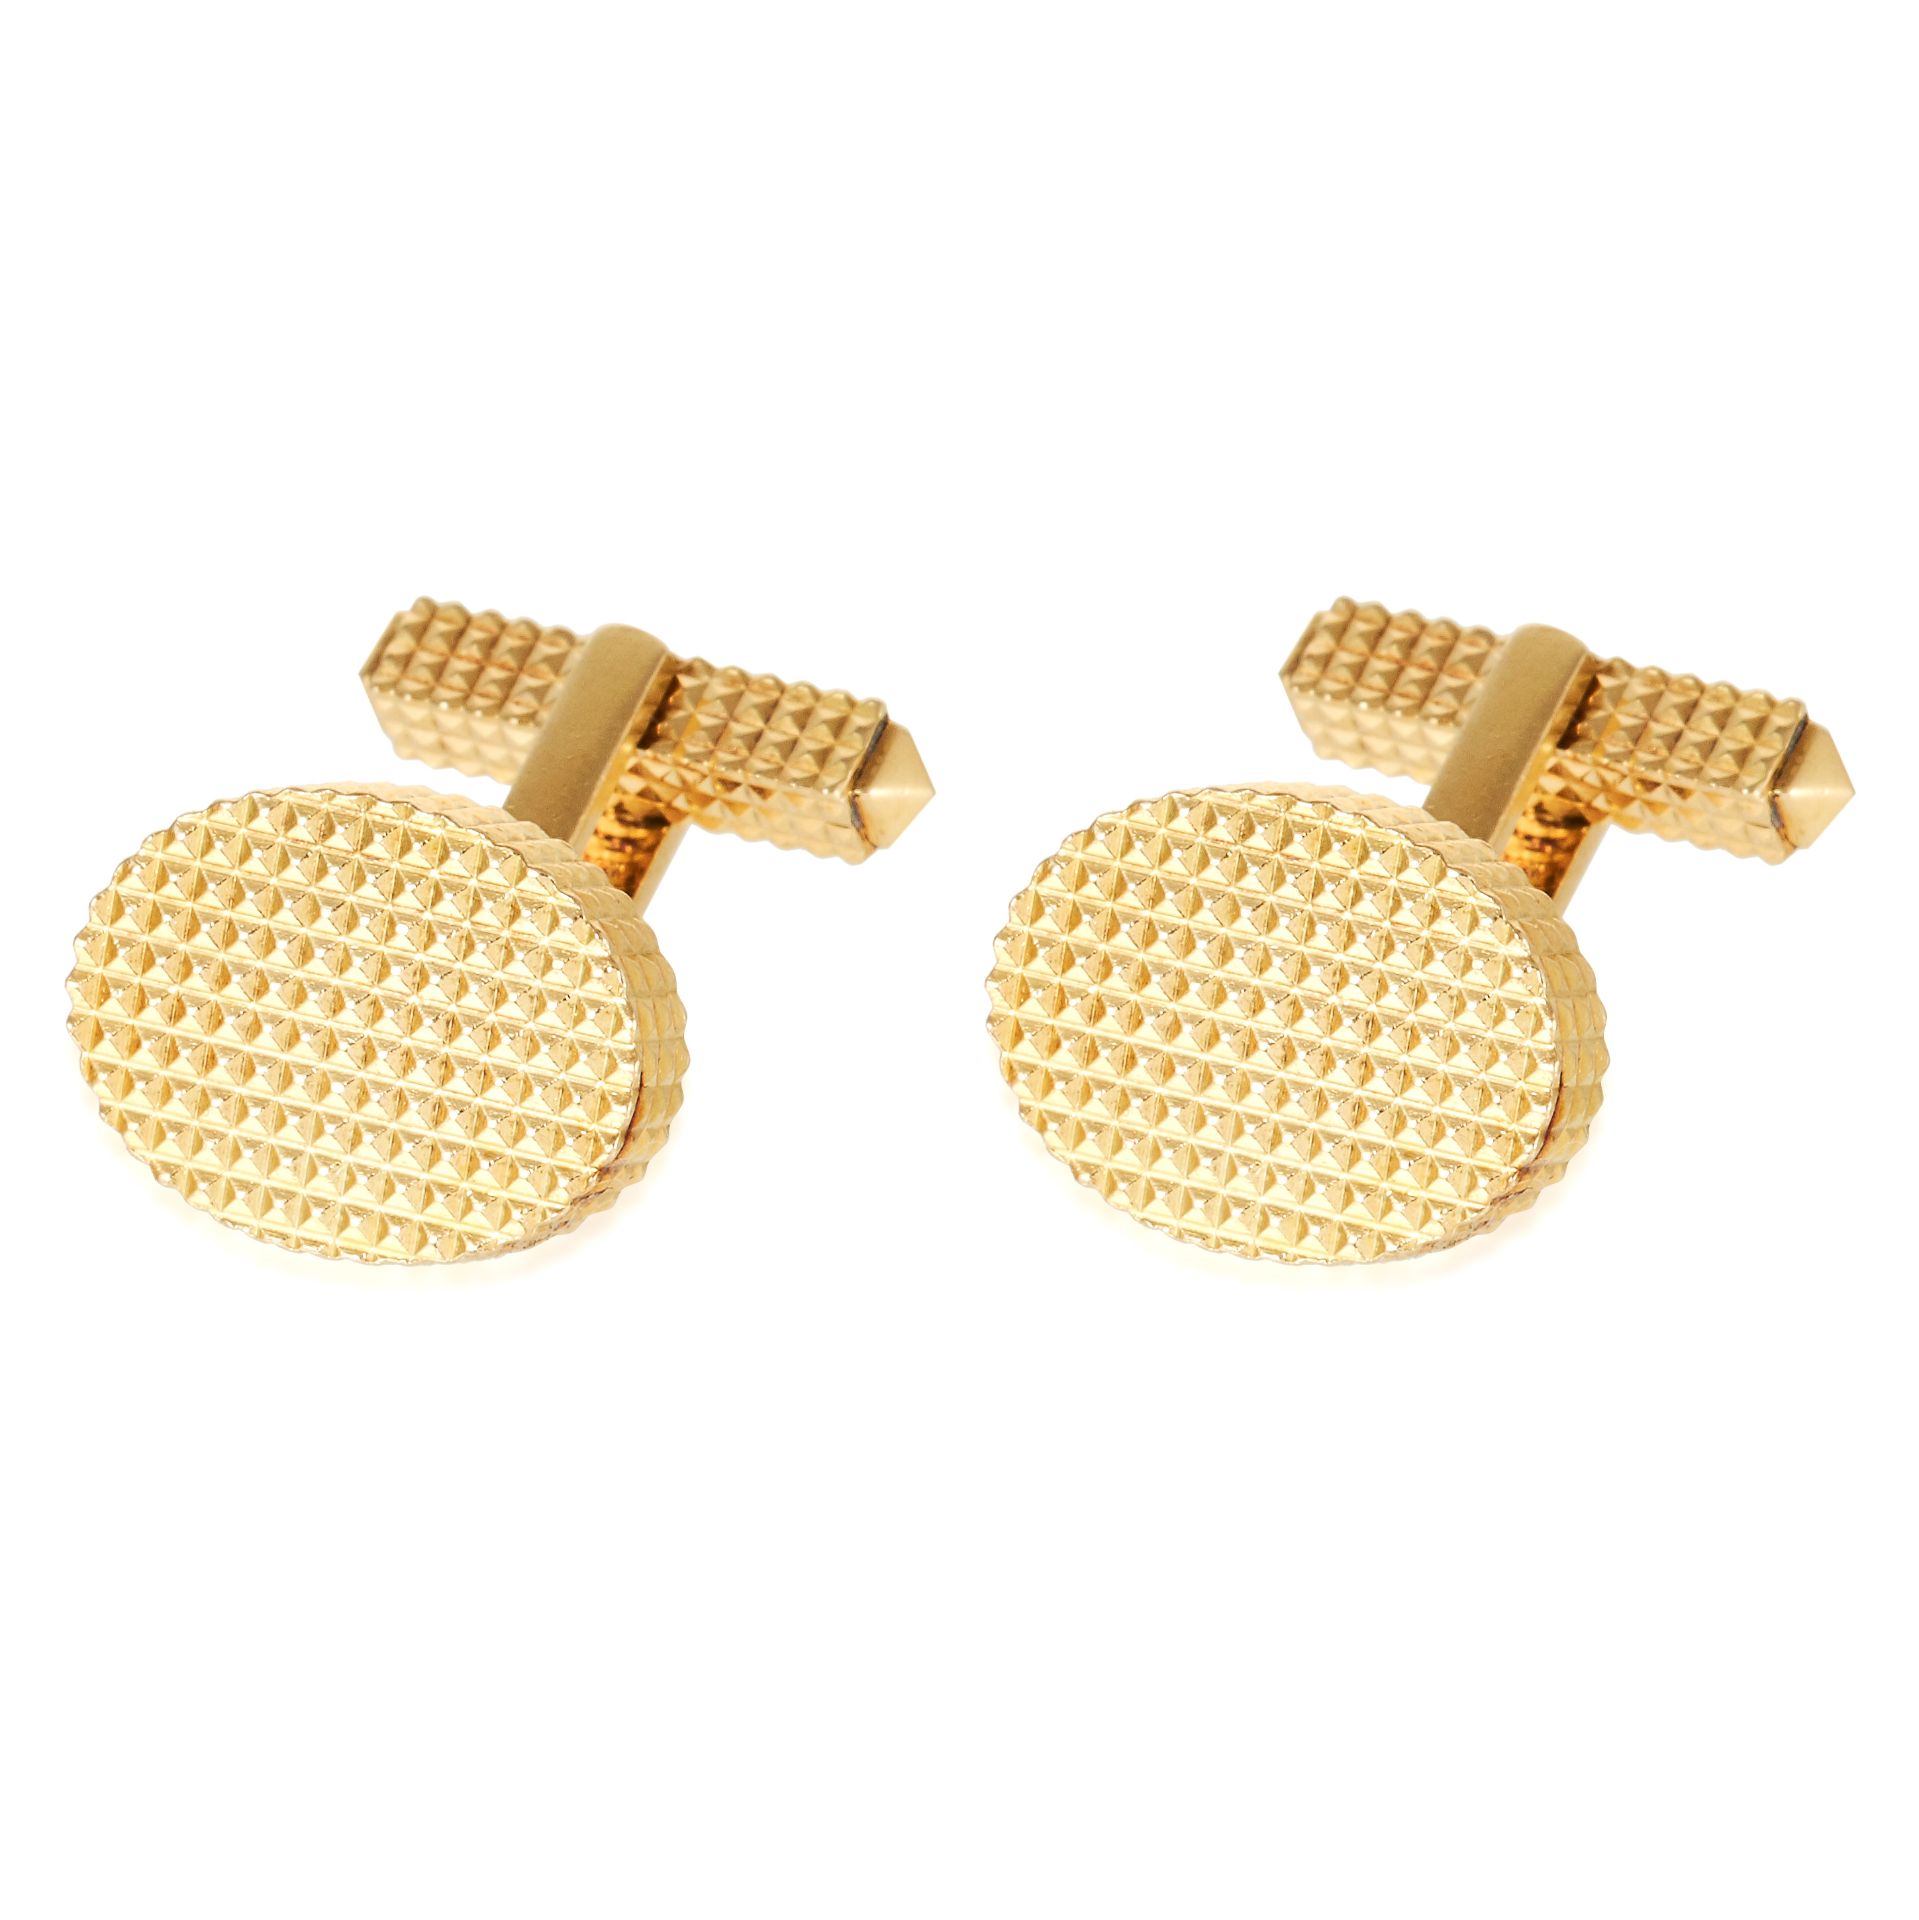 A PAIR OF HOBNAIL CUFFLINKS, TIFFANY & CO, CIRCA 1970s in 18ct yellow gold, with textured design,